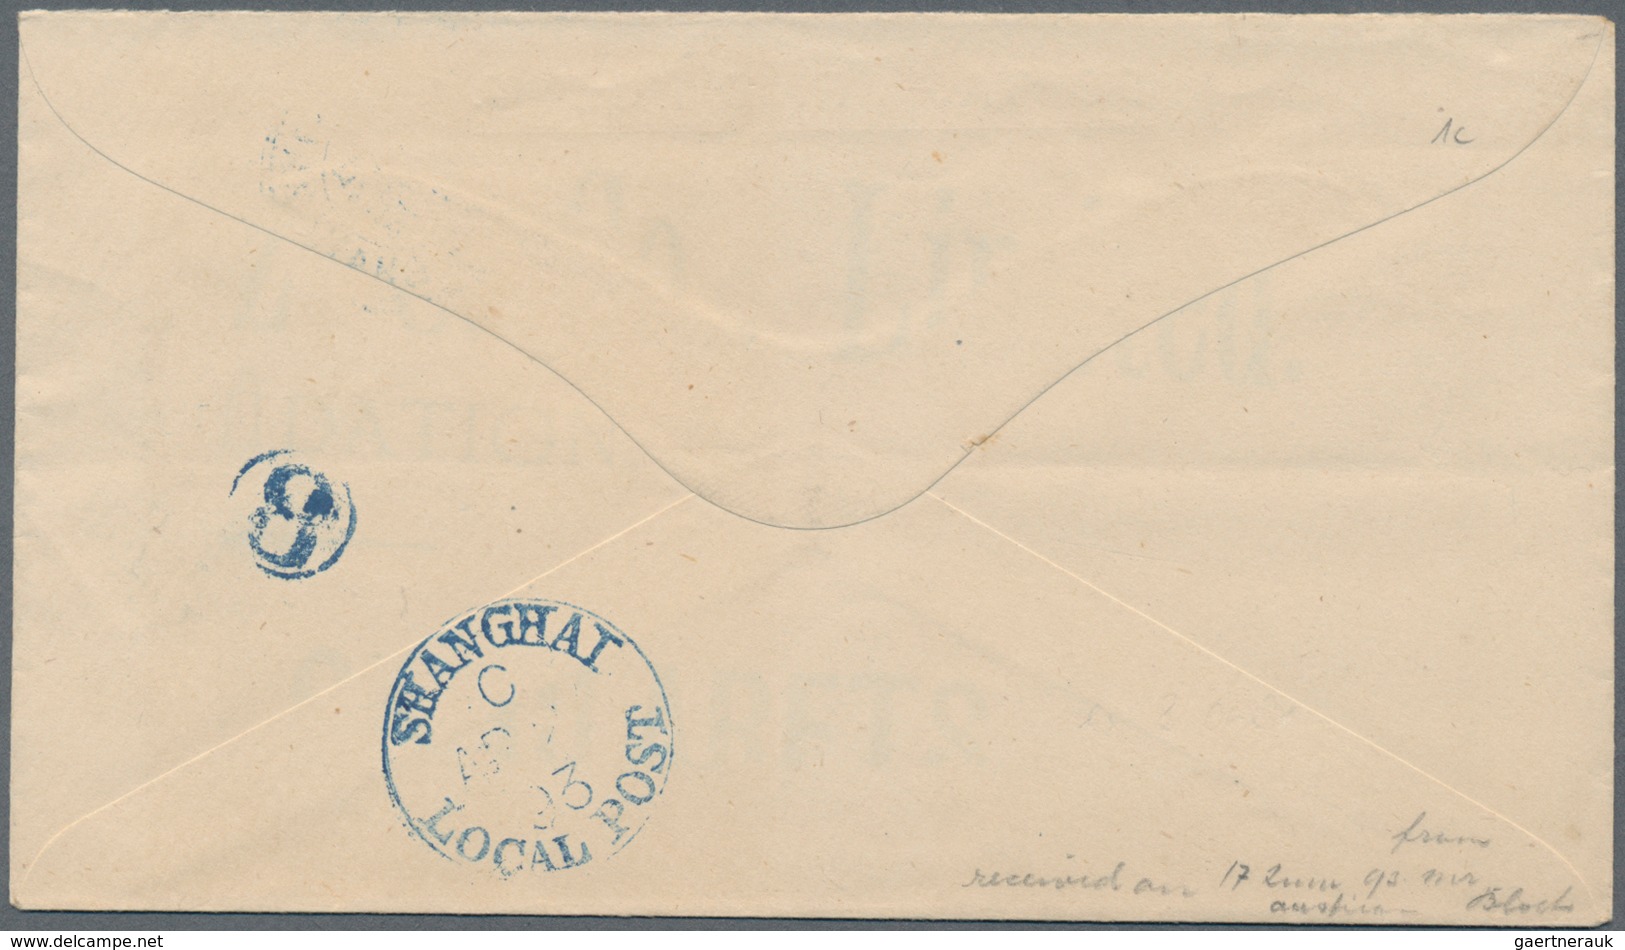 China - Shanghai: 1893, Envelope "POSTAGE PAID 1 CENT." Canc. Bilingual Blue "LOCAL POST SHANGHAI" W - Other & Unclassified